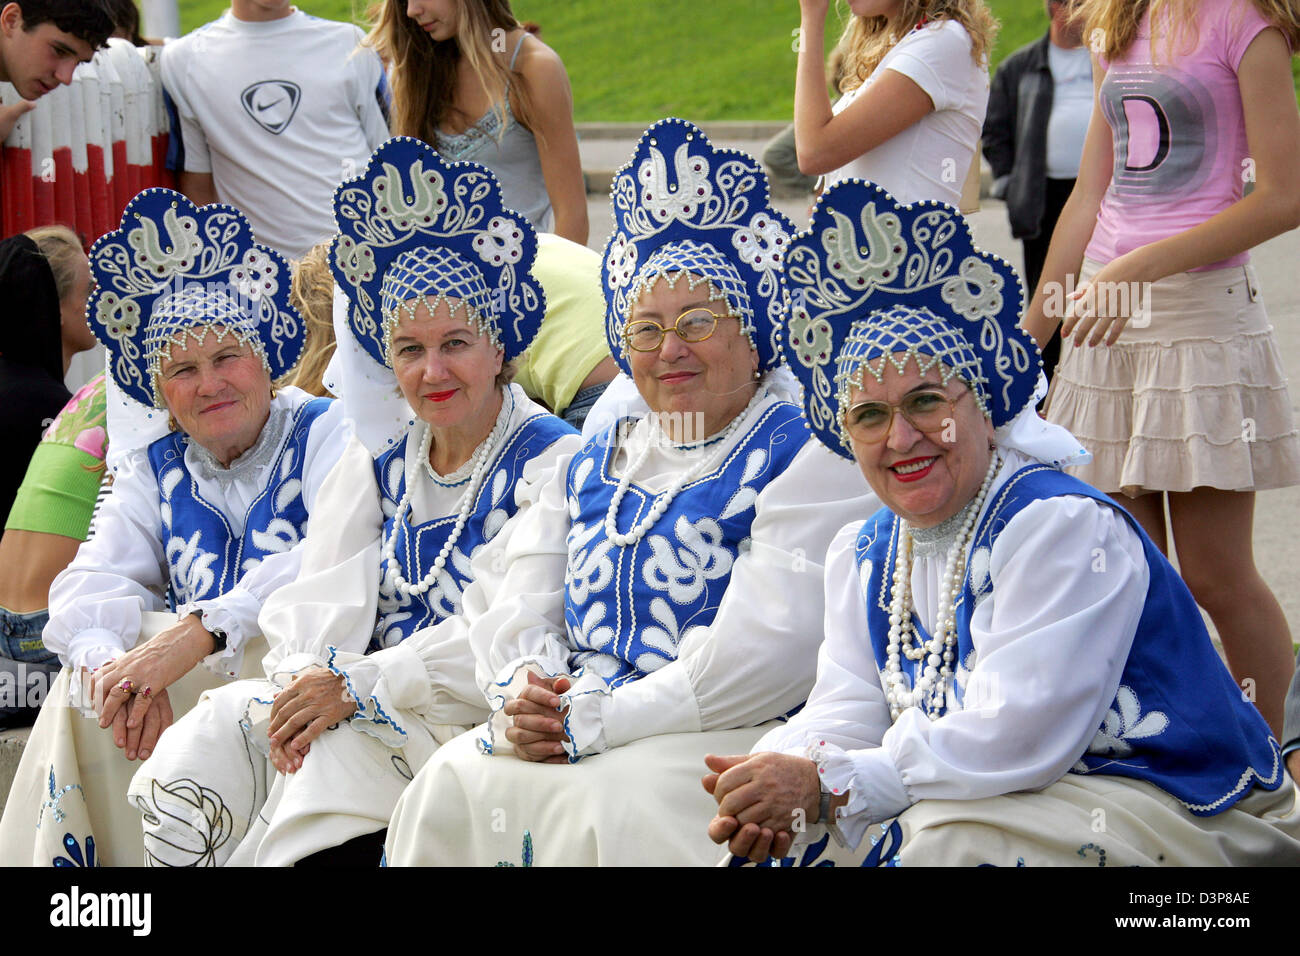 Russian women wear traditional clothes at the festivities to the 417th  anniversary of Volgograd, Russia, 10 September 2006. Photo: Uwe Zucchi  Stock Photo - Alamy